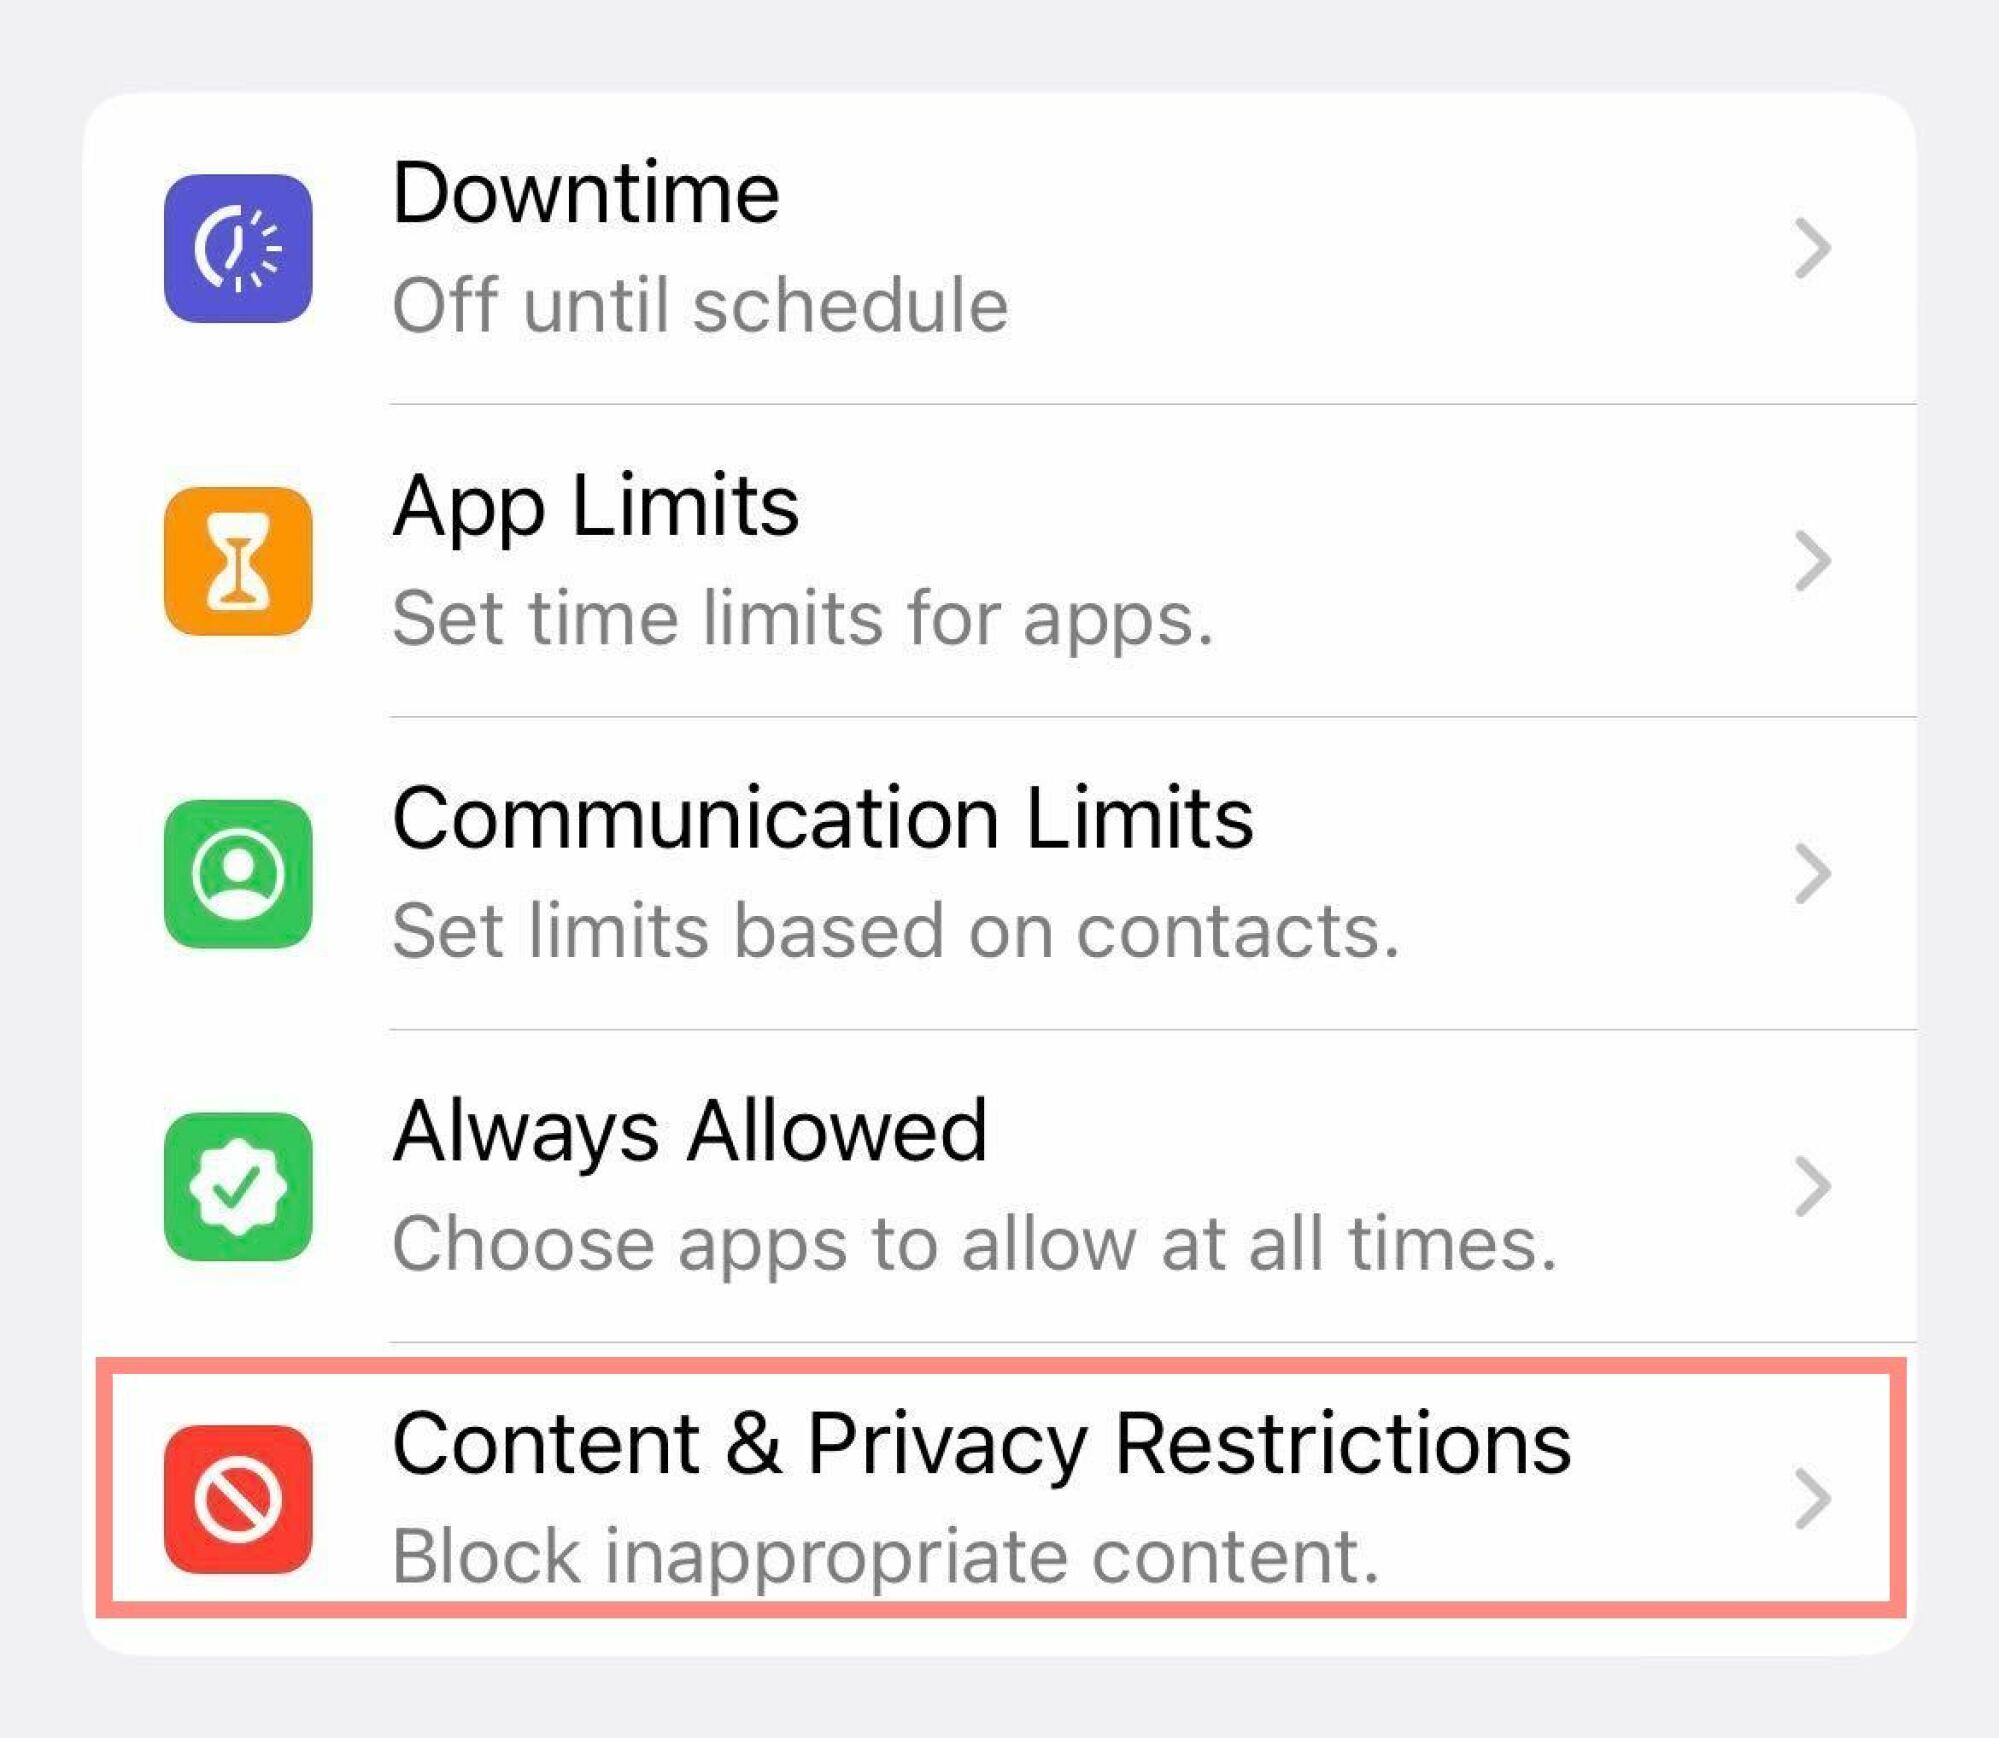 A screenshot showing "Content and Privacy Restrictions".